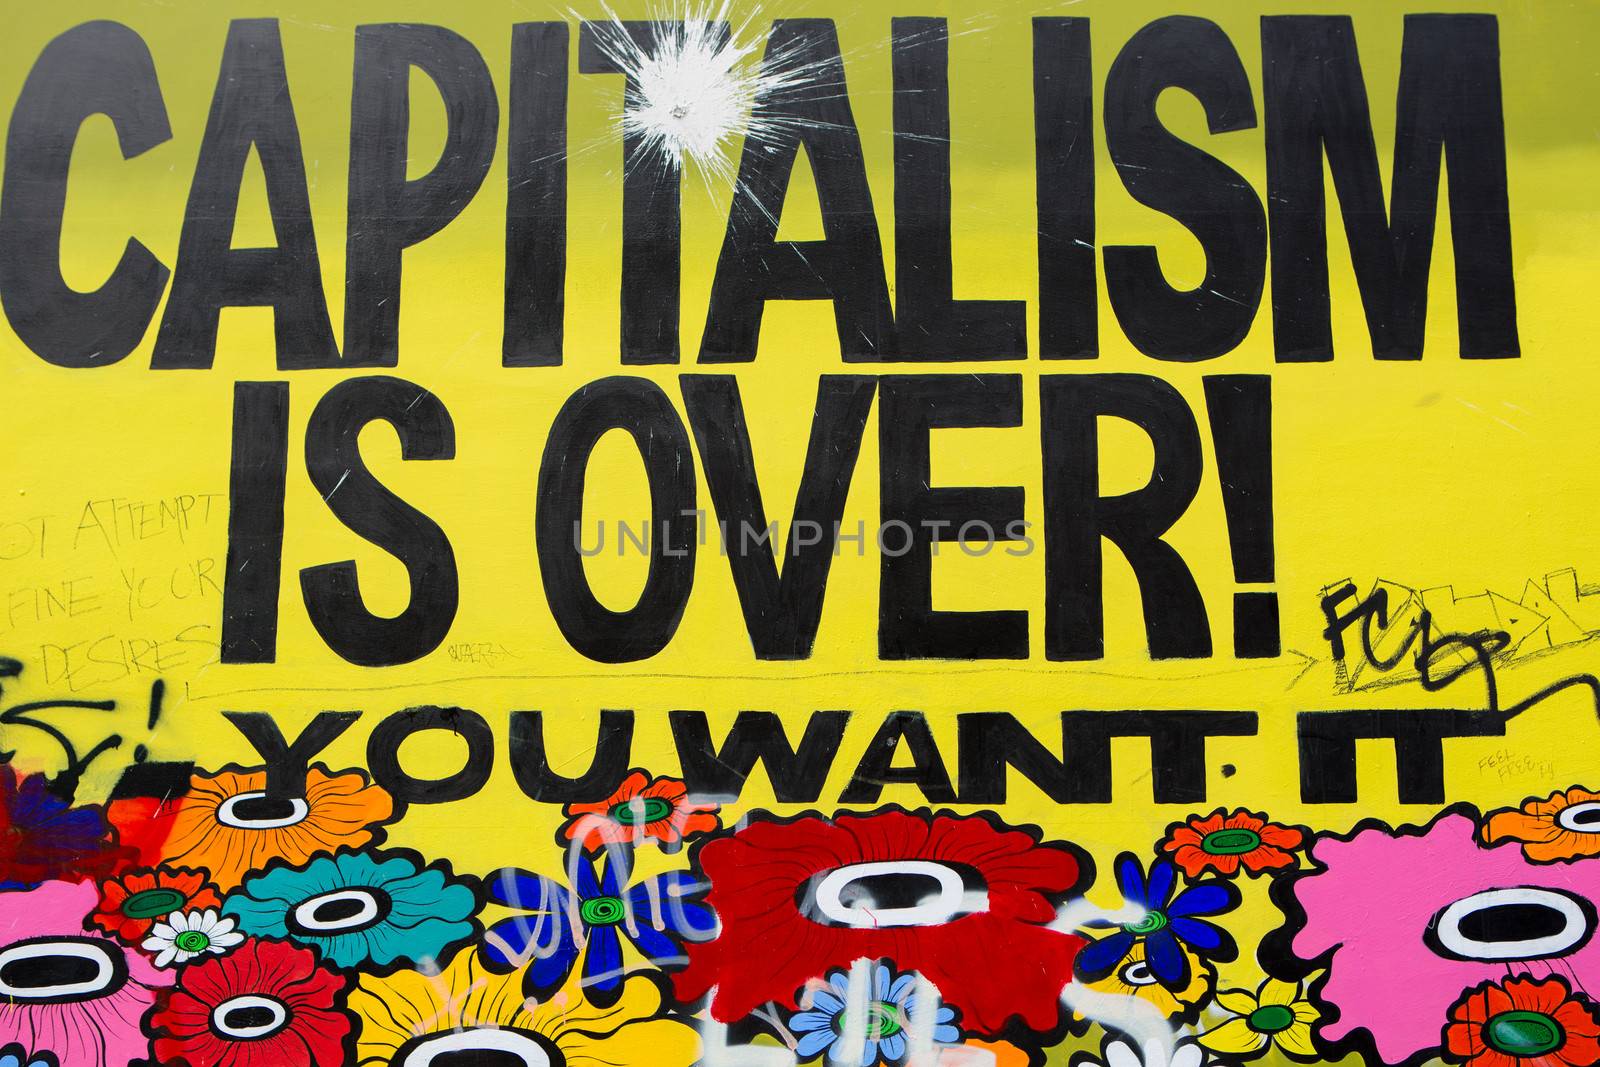 Capitalism is over! you want it … Drawing in San Francisco.